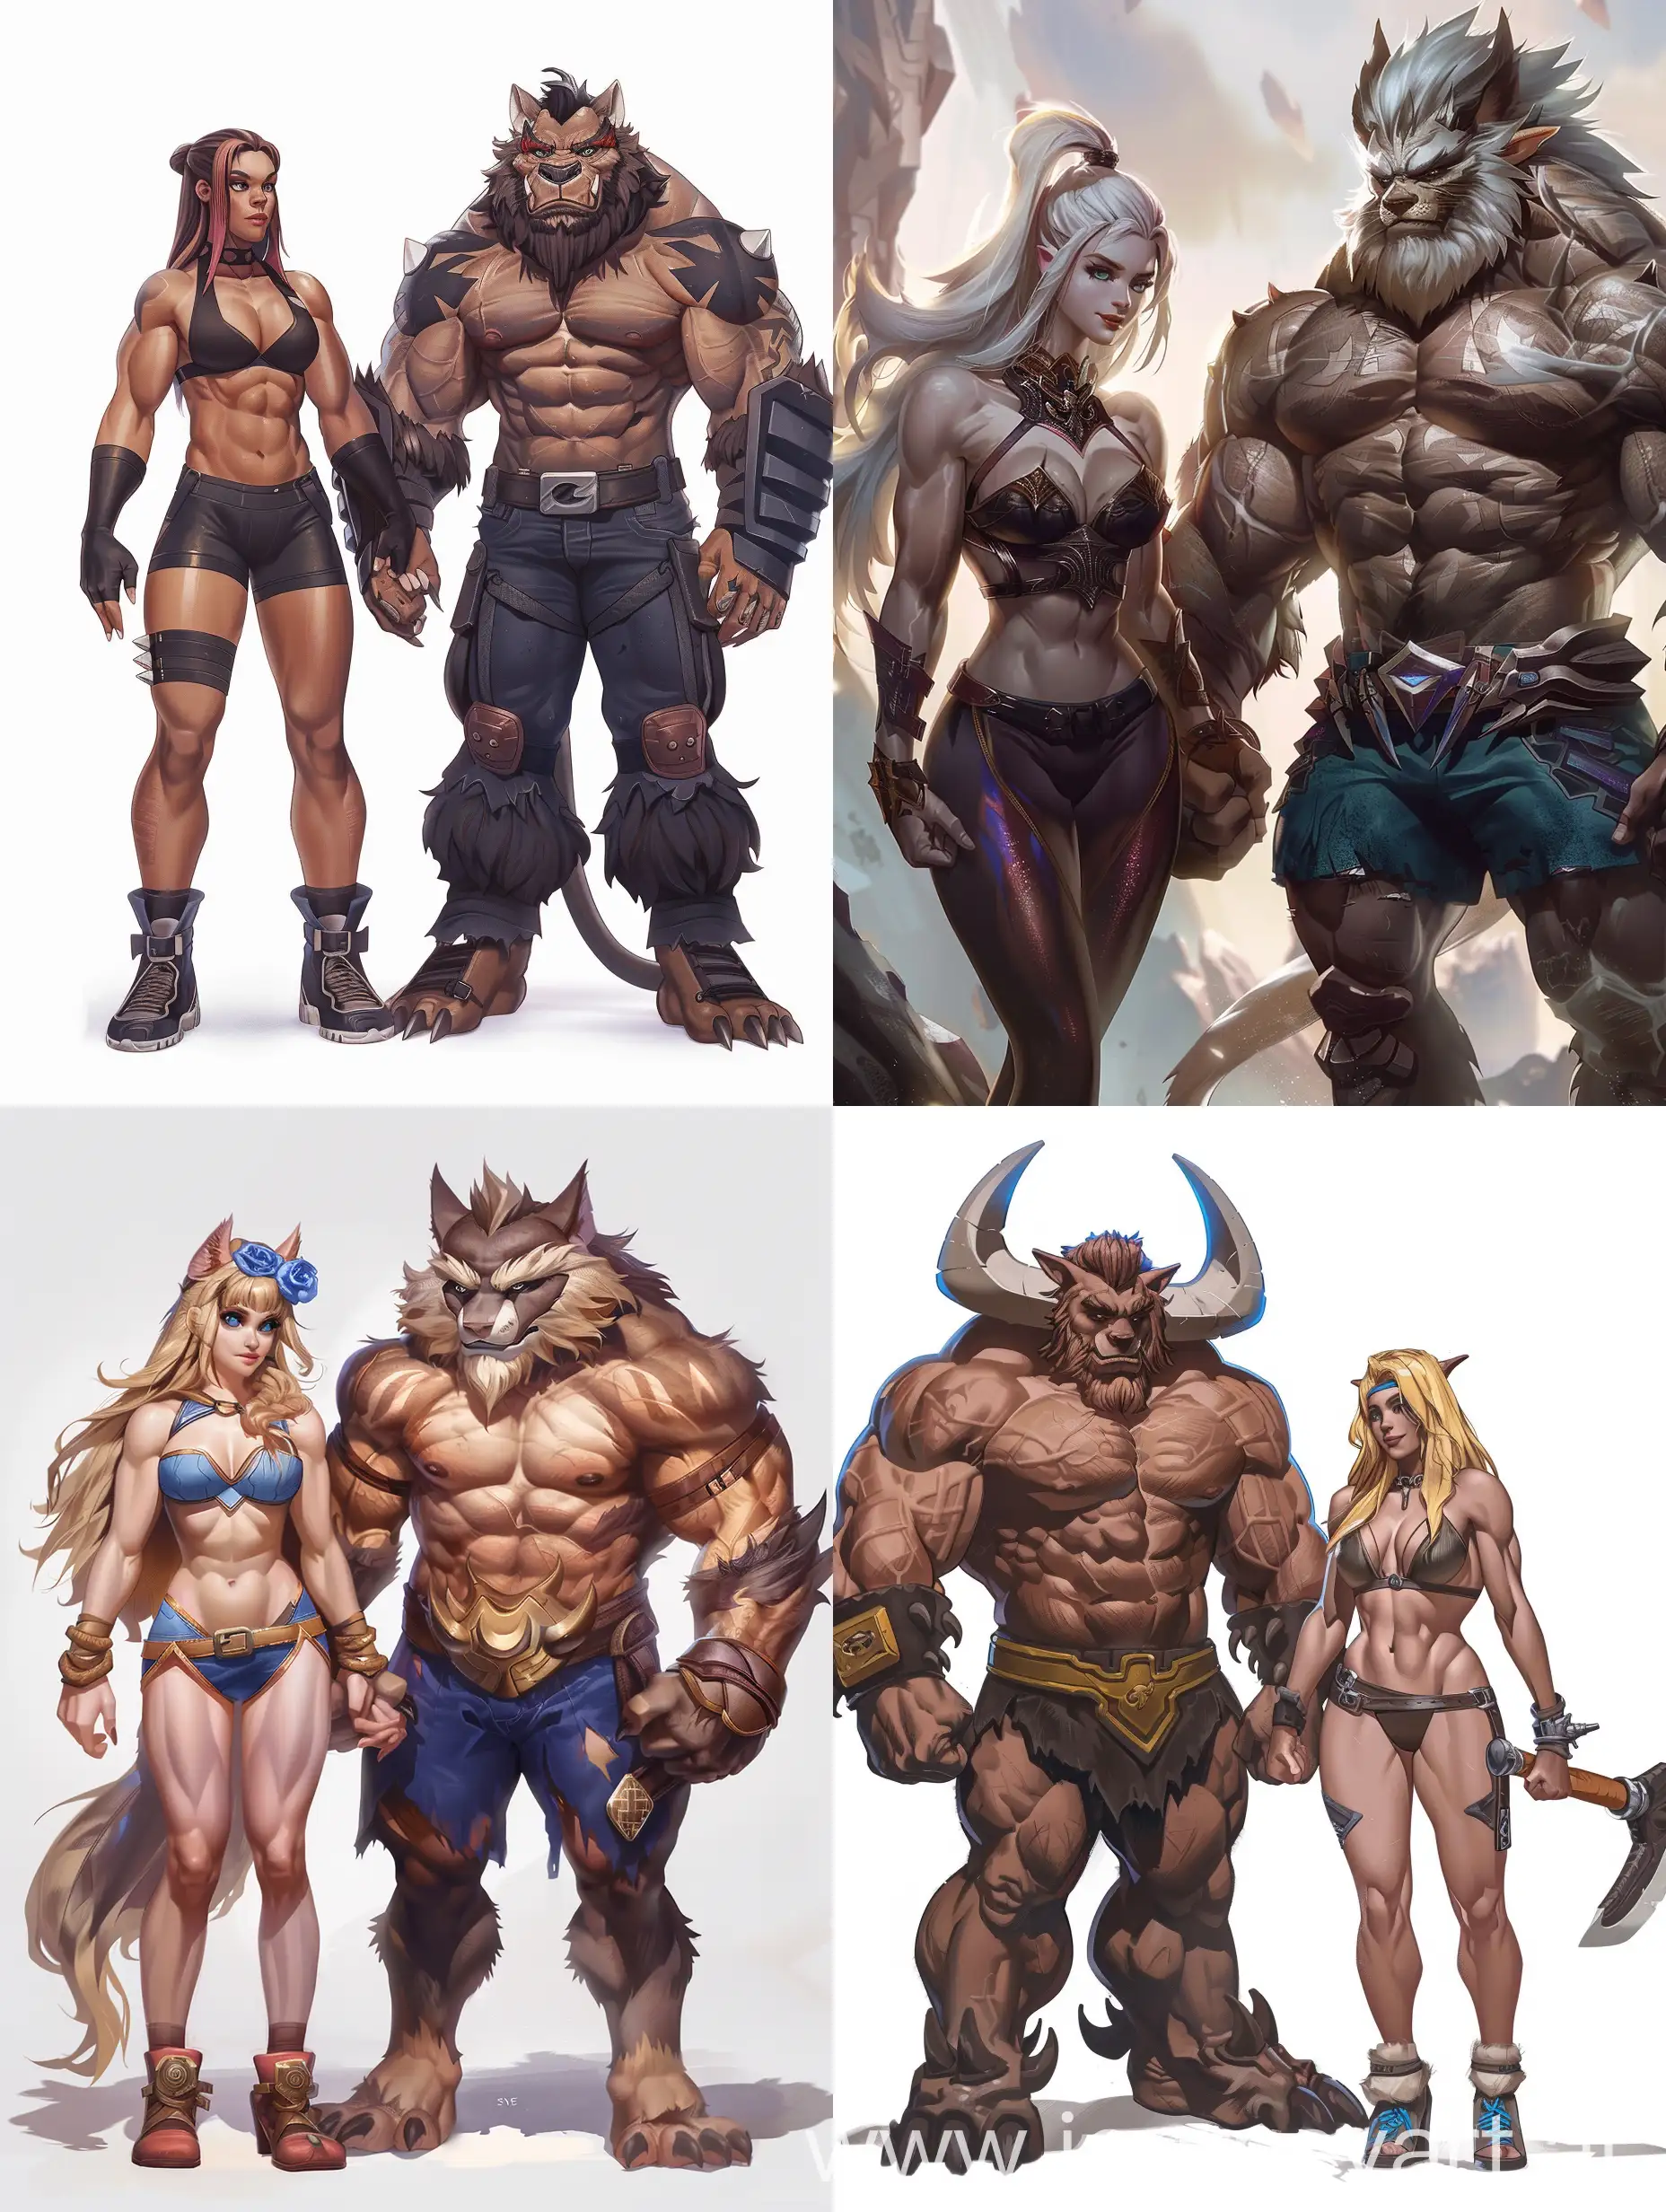 Dynamic-Bodybuilding-Couple-Holding-Hands-in-League-of-Legends-Style